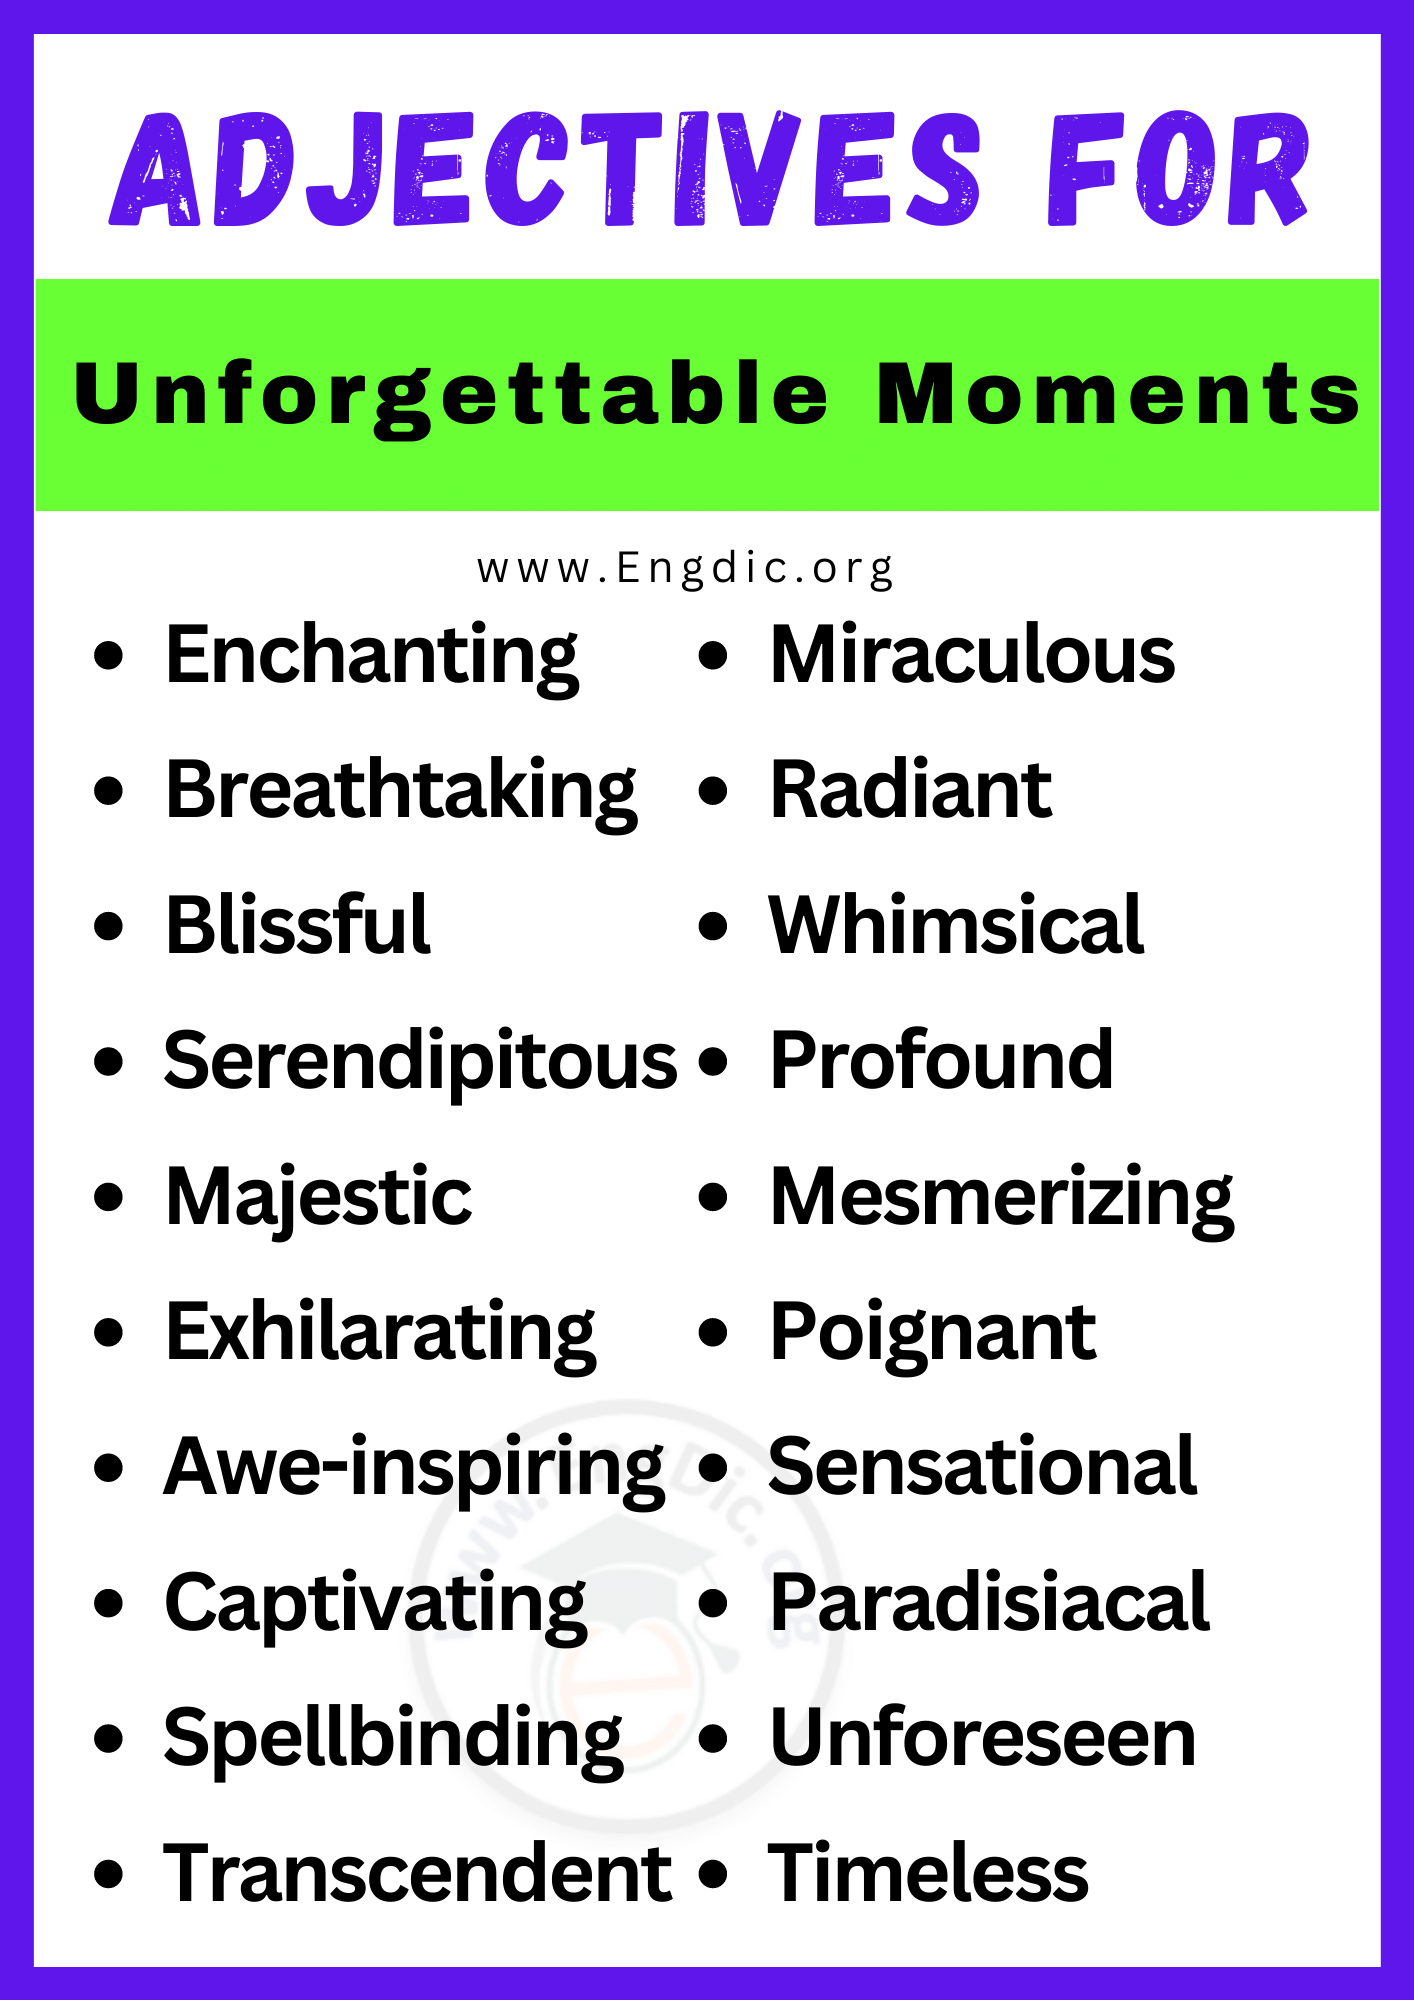 Adjectives for Unforgettable Moments